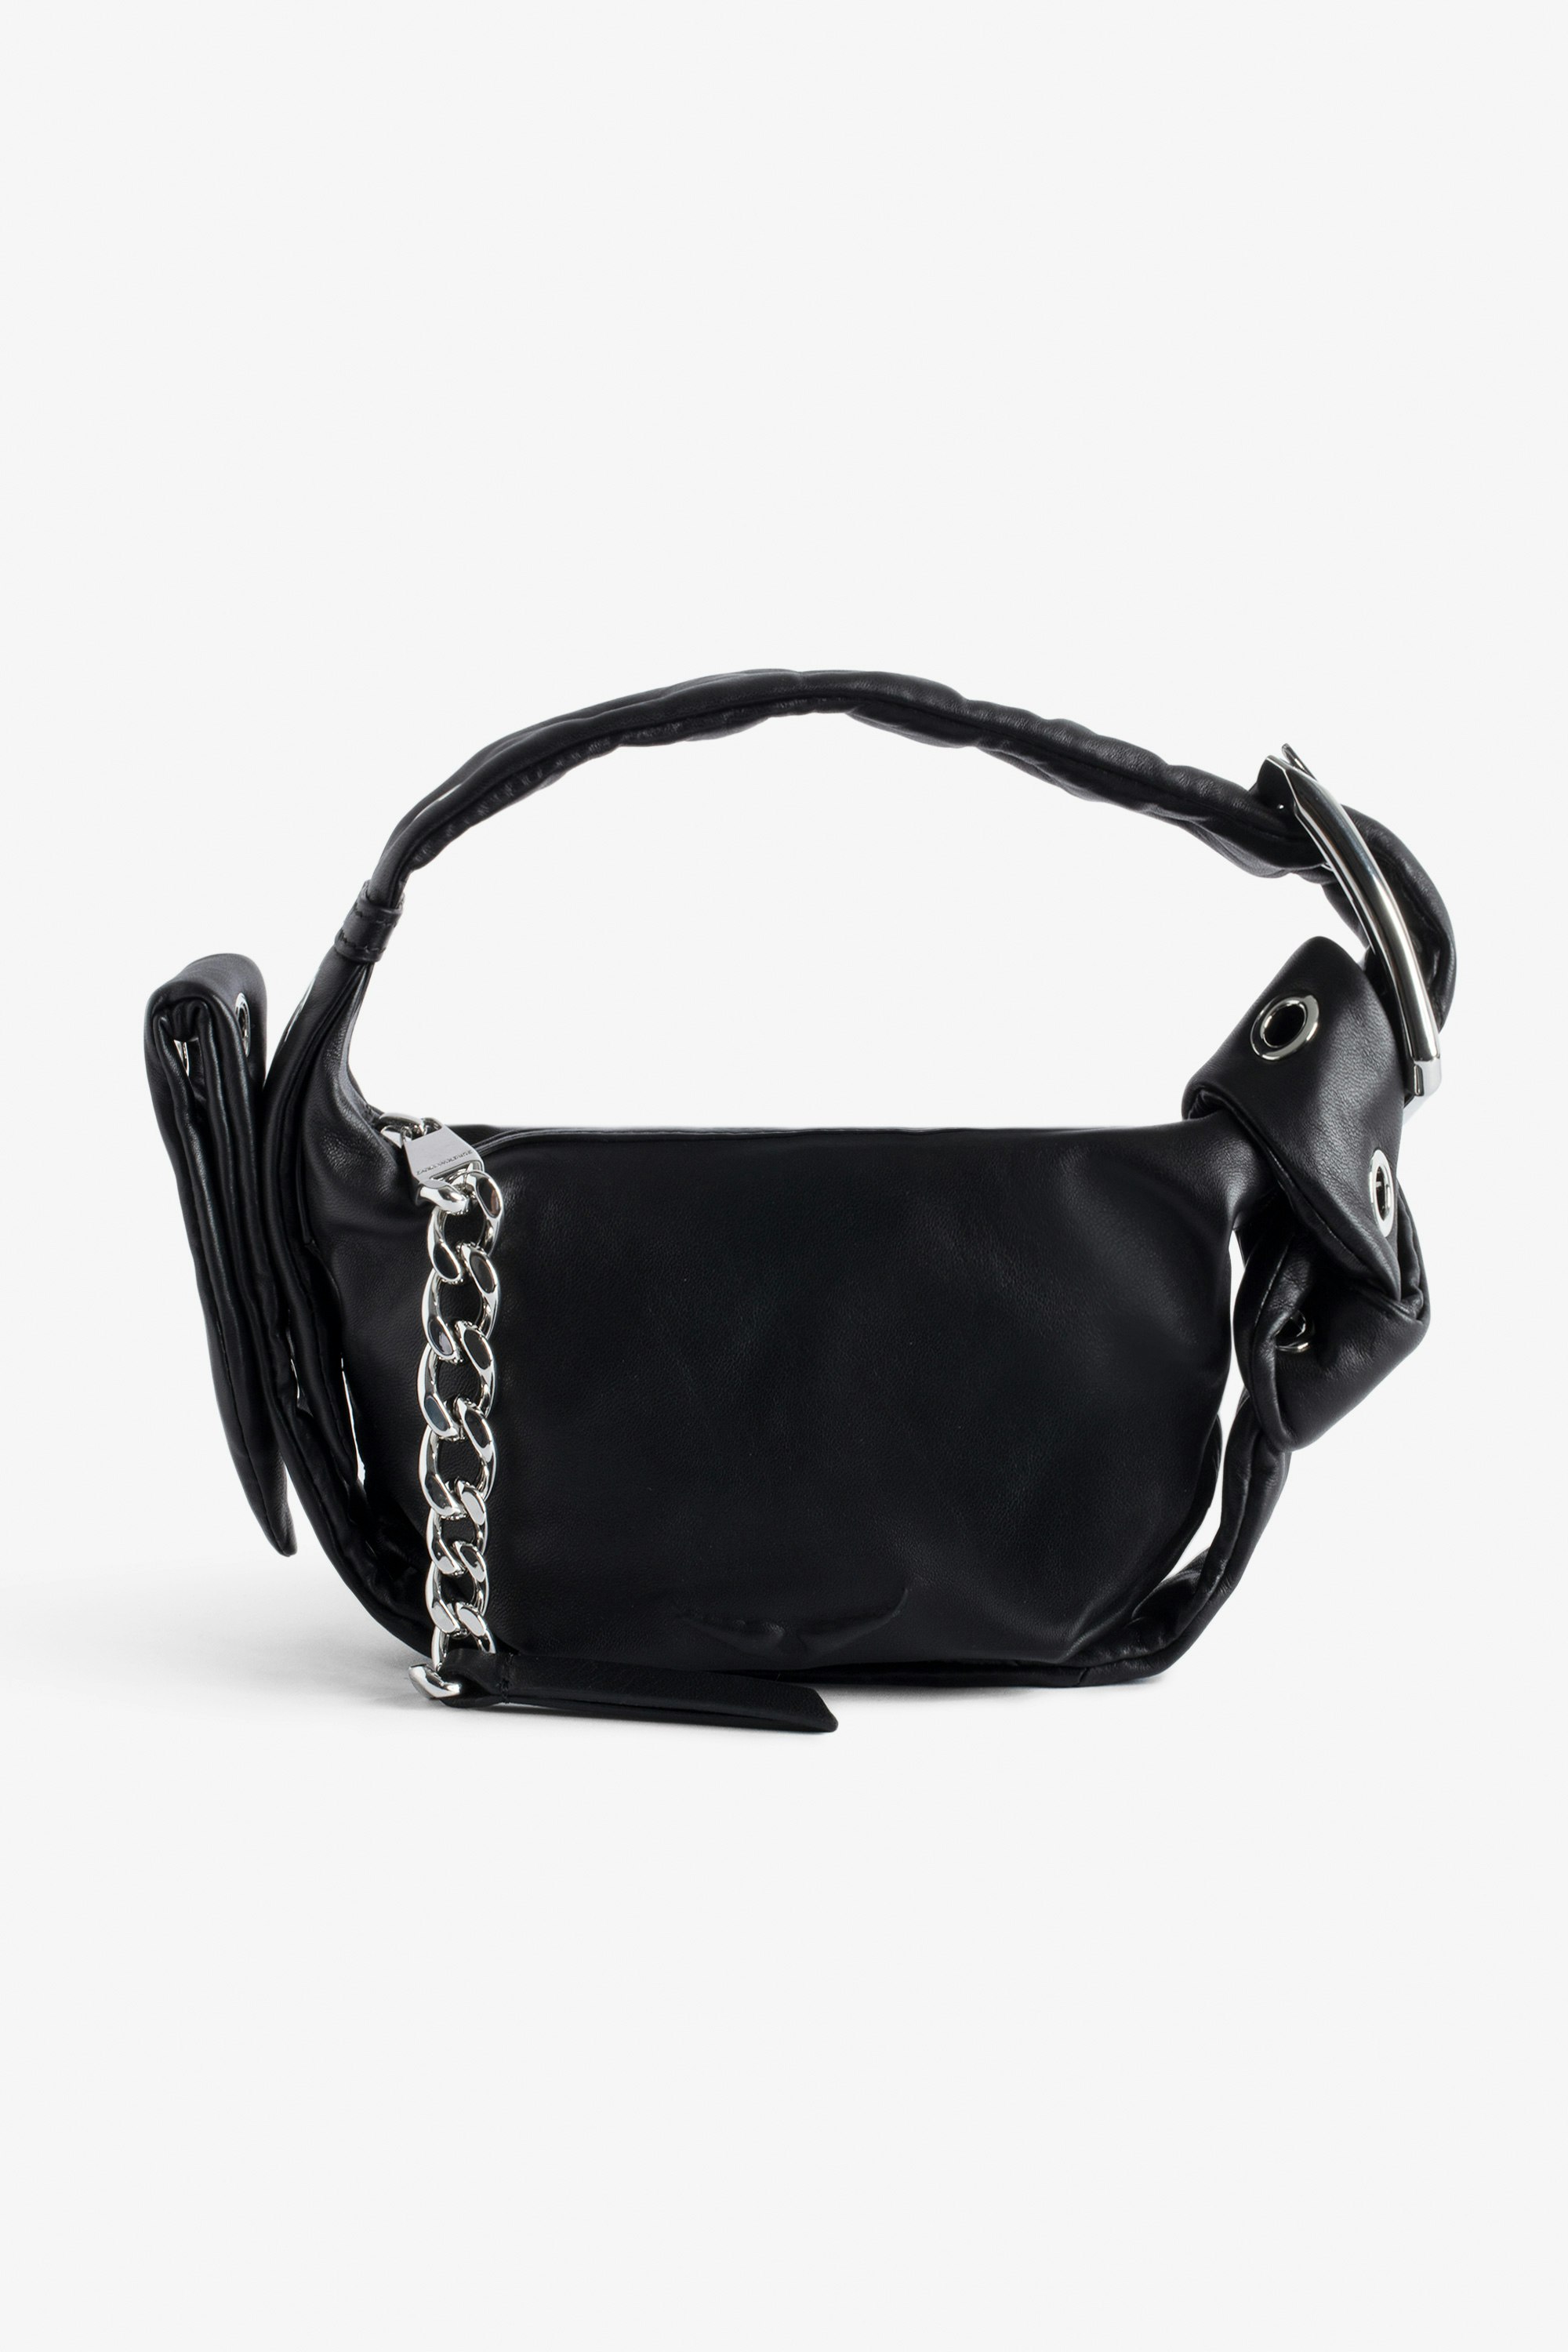 Le Cecilia XS Obsession Bag - Women’s small black smooth leather bag with shoulder strap and metal C buckle.